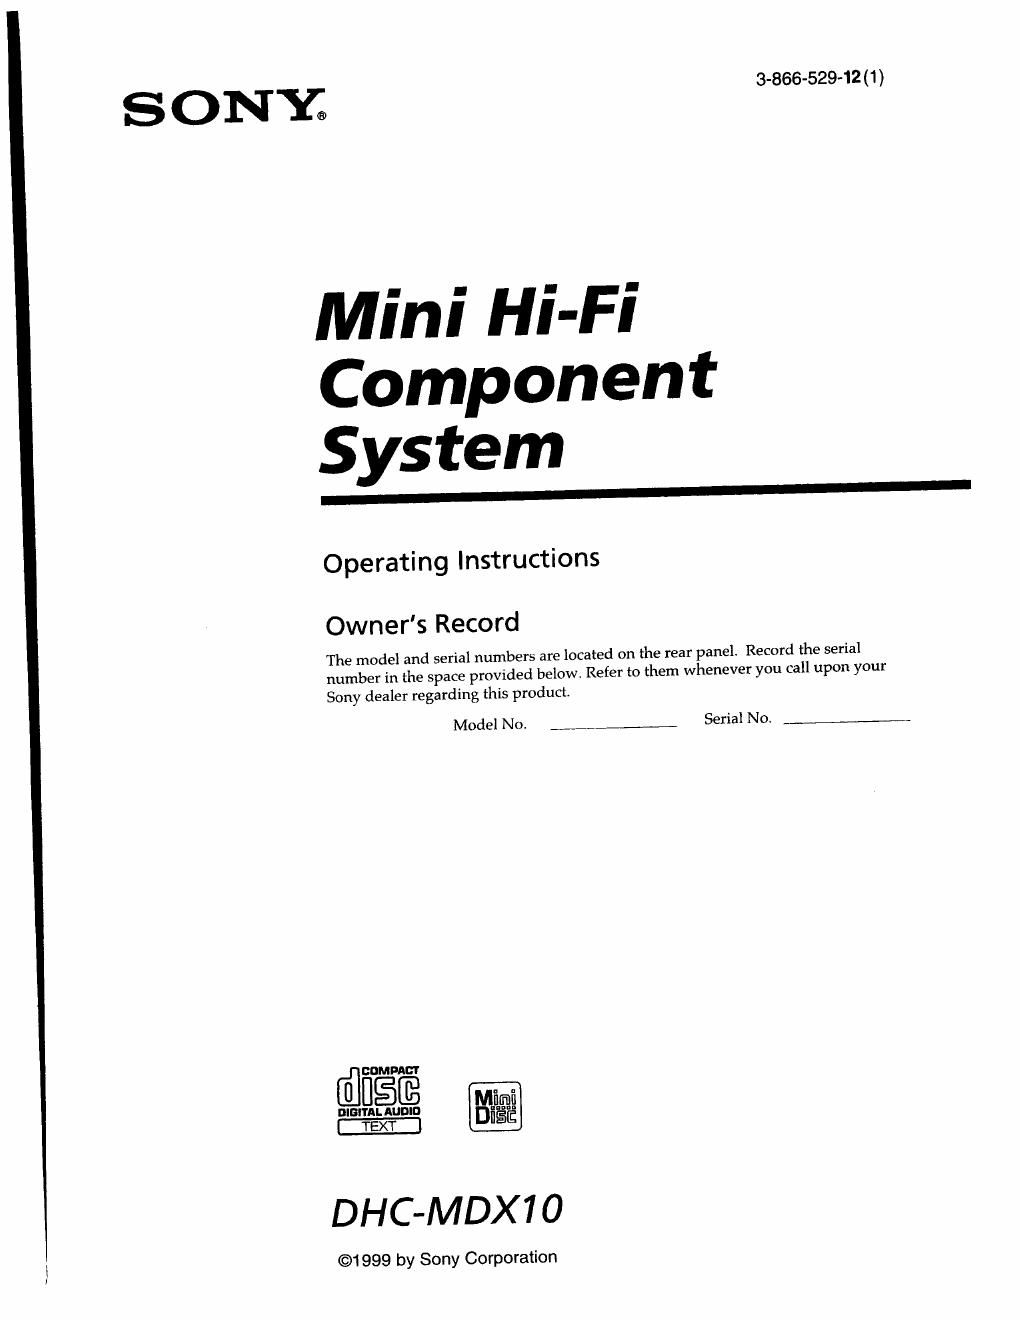 sony dhc mdx 10 owners manual